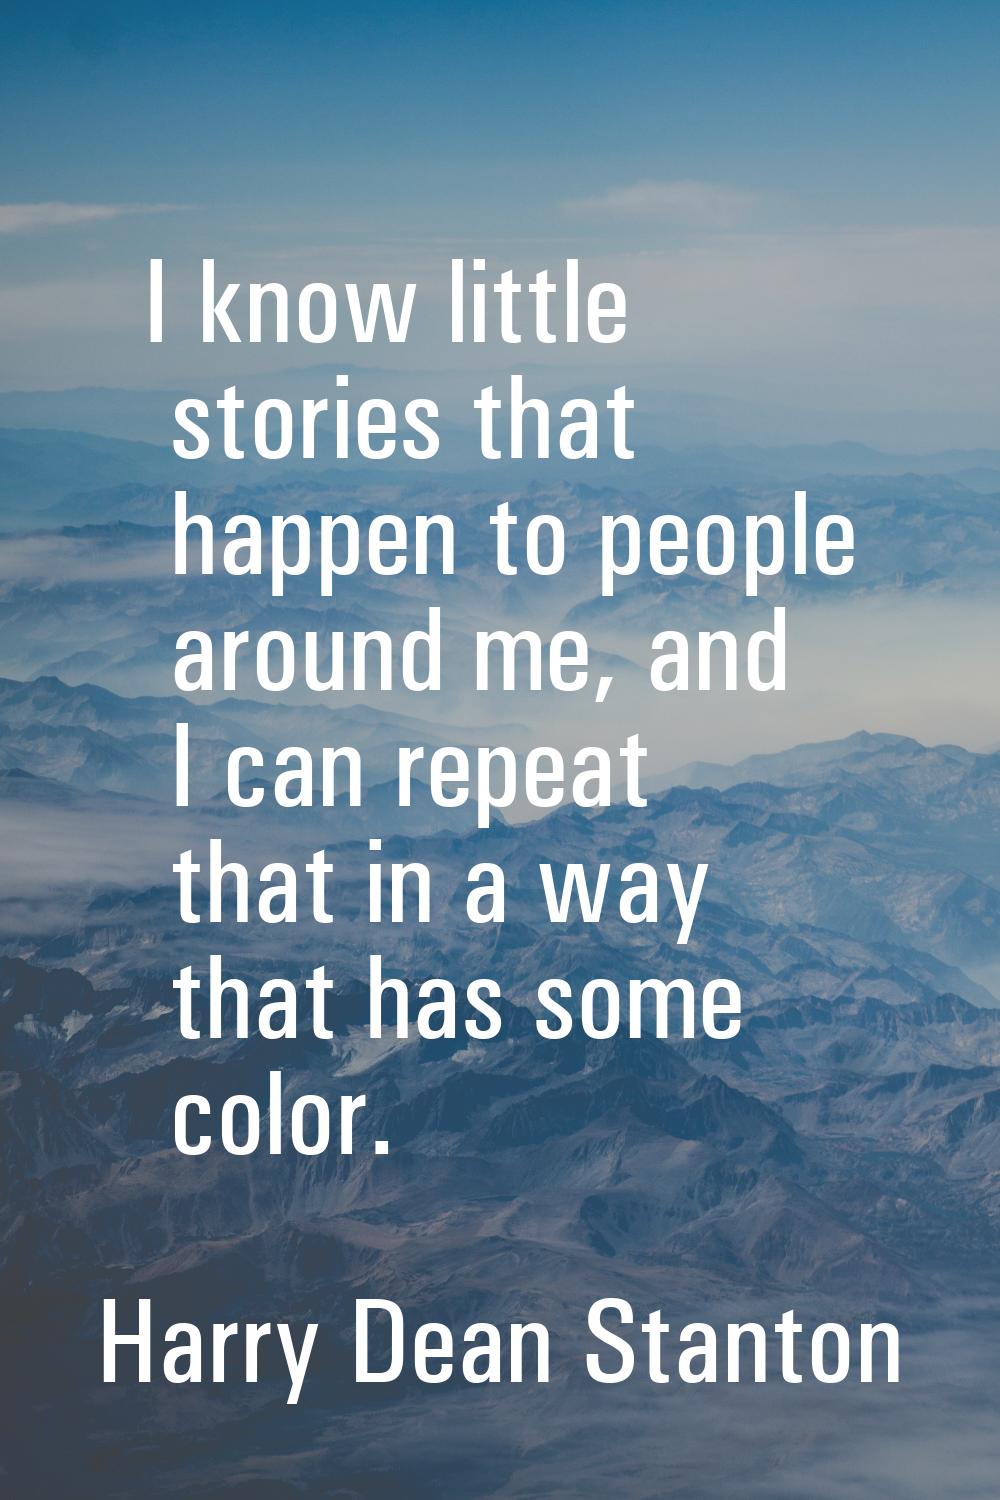 I know little stories that happen to people around me, and I can repeat that in a way that has some